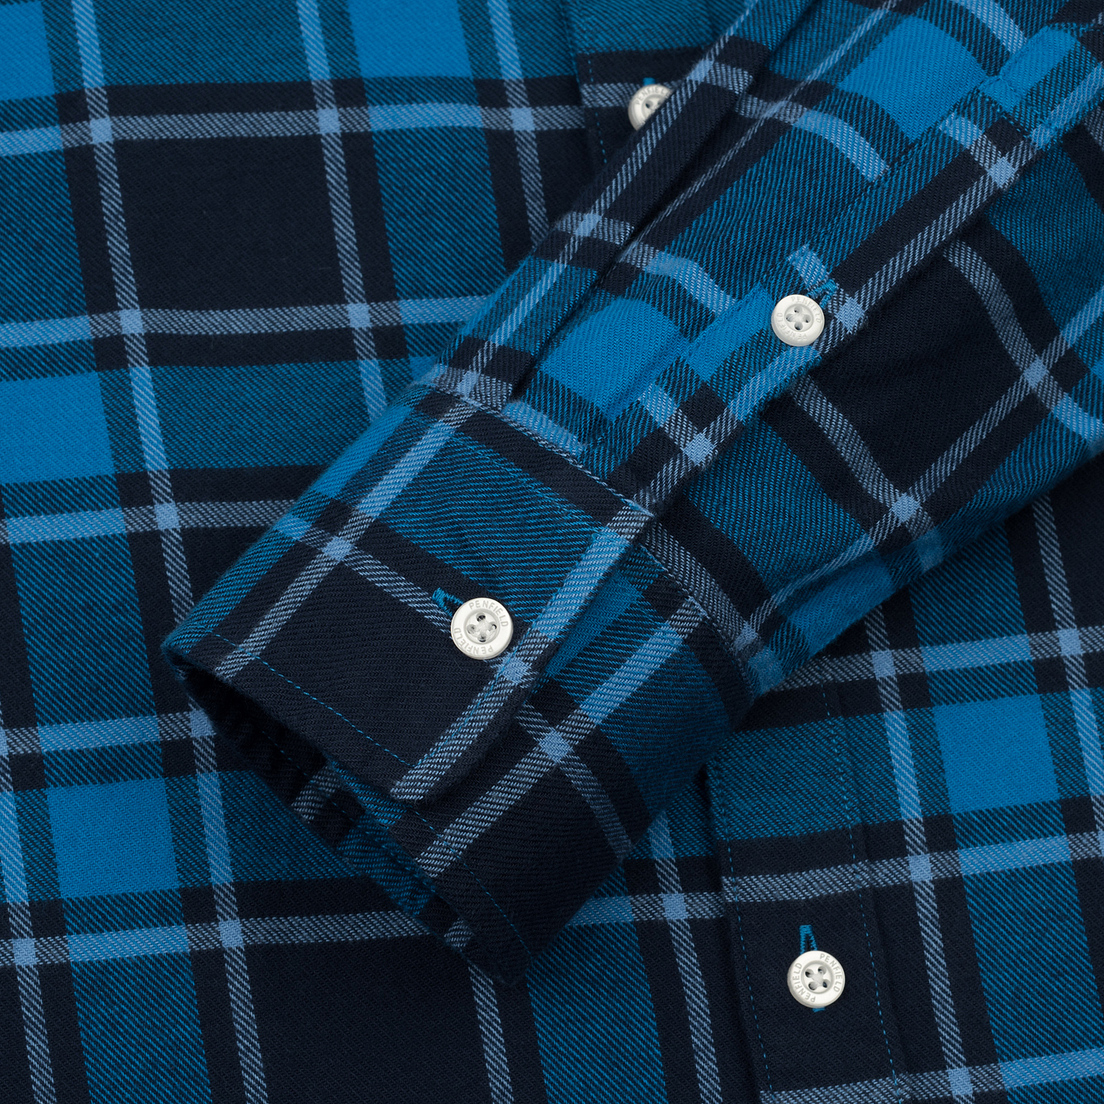 Penfield Мужская рубашка Ravens Brushed Cotton Checked